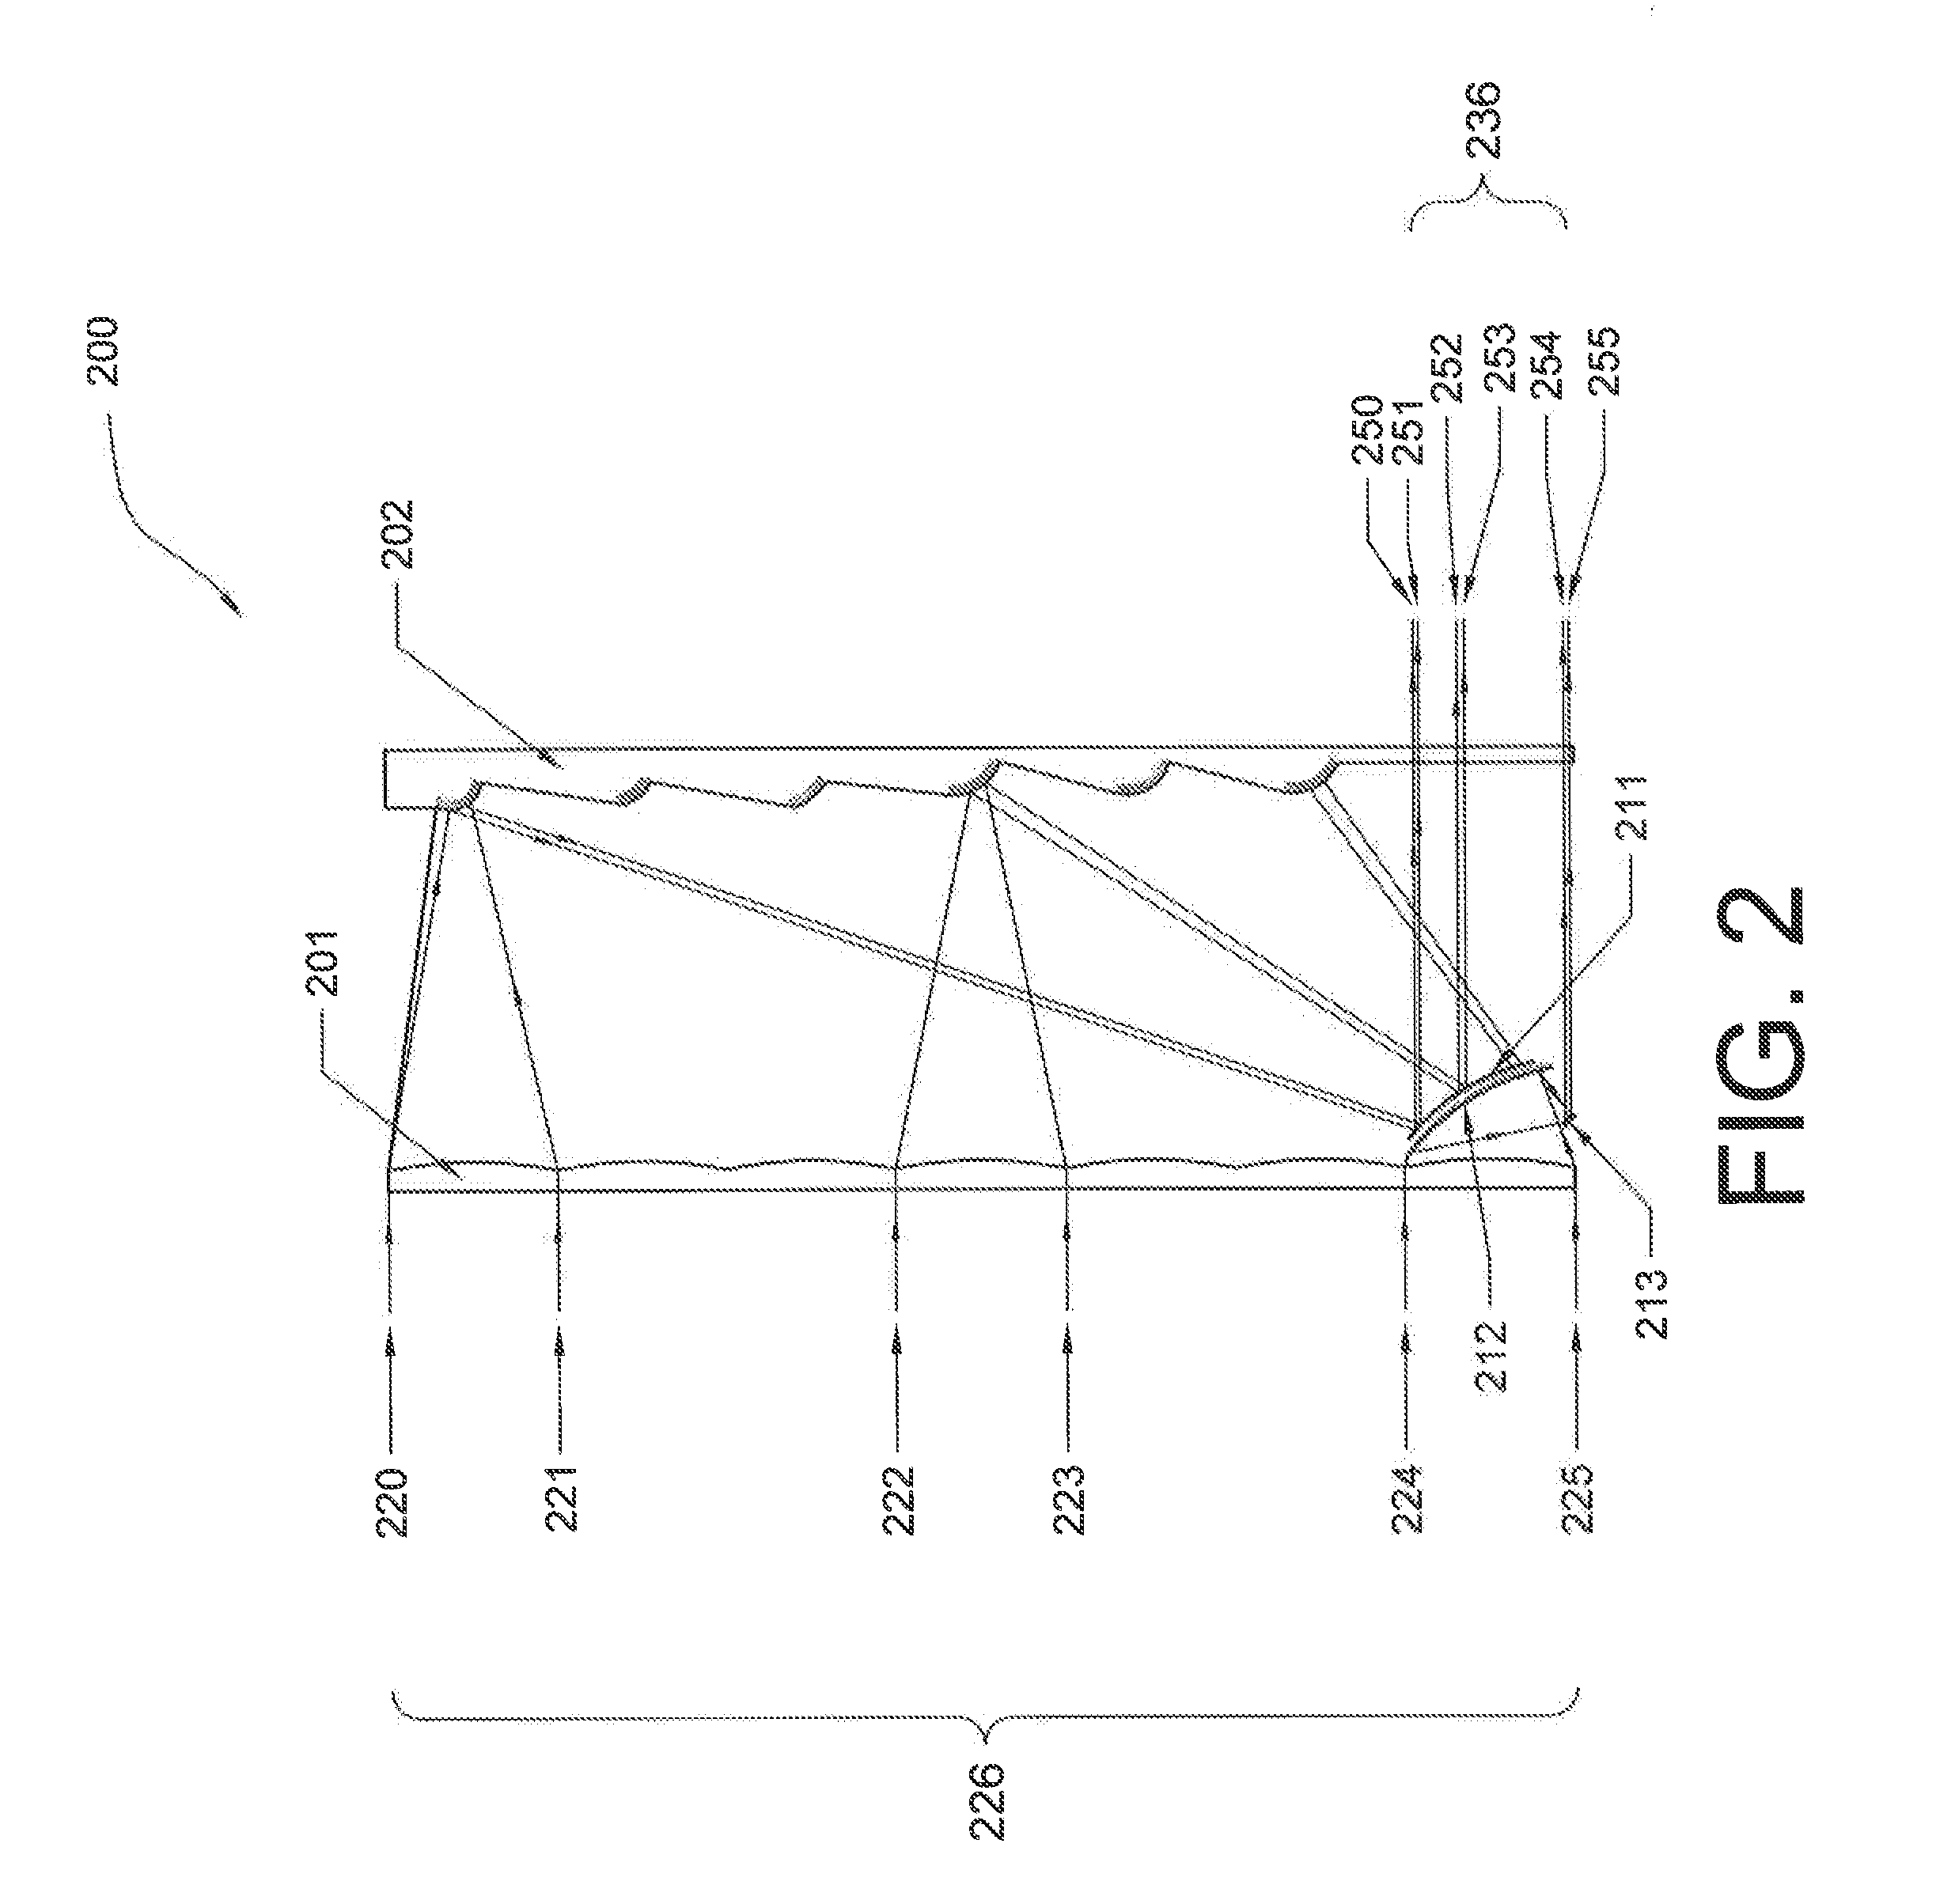 Hybrid optical devices, and applications using same including optical cloaking system